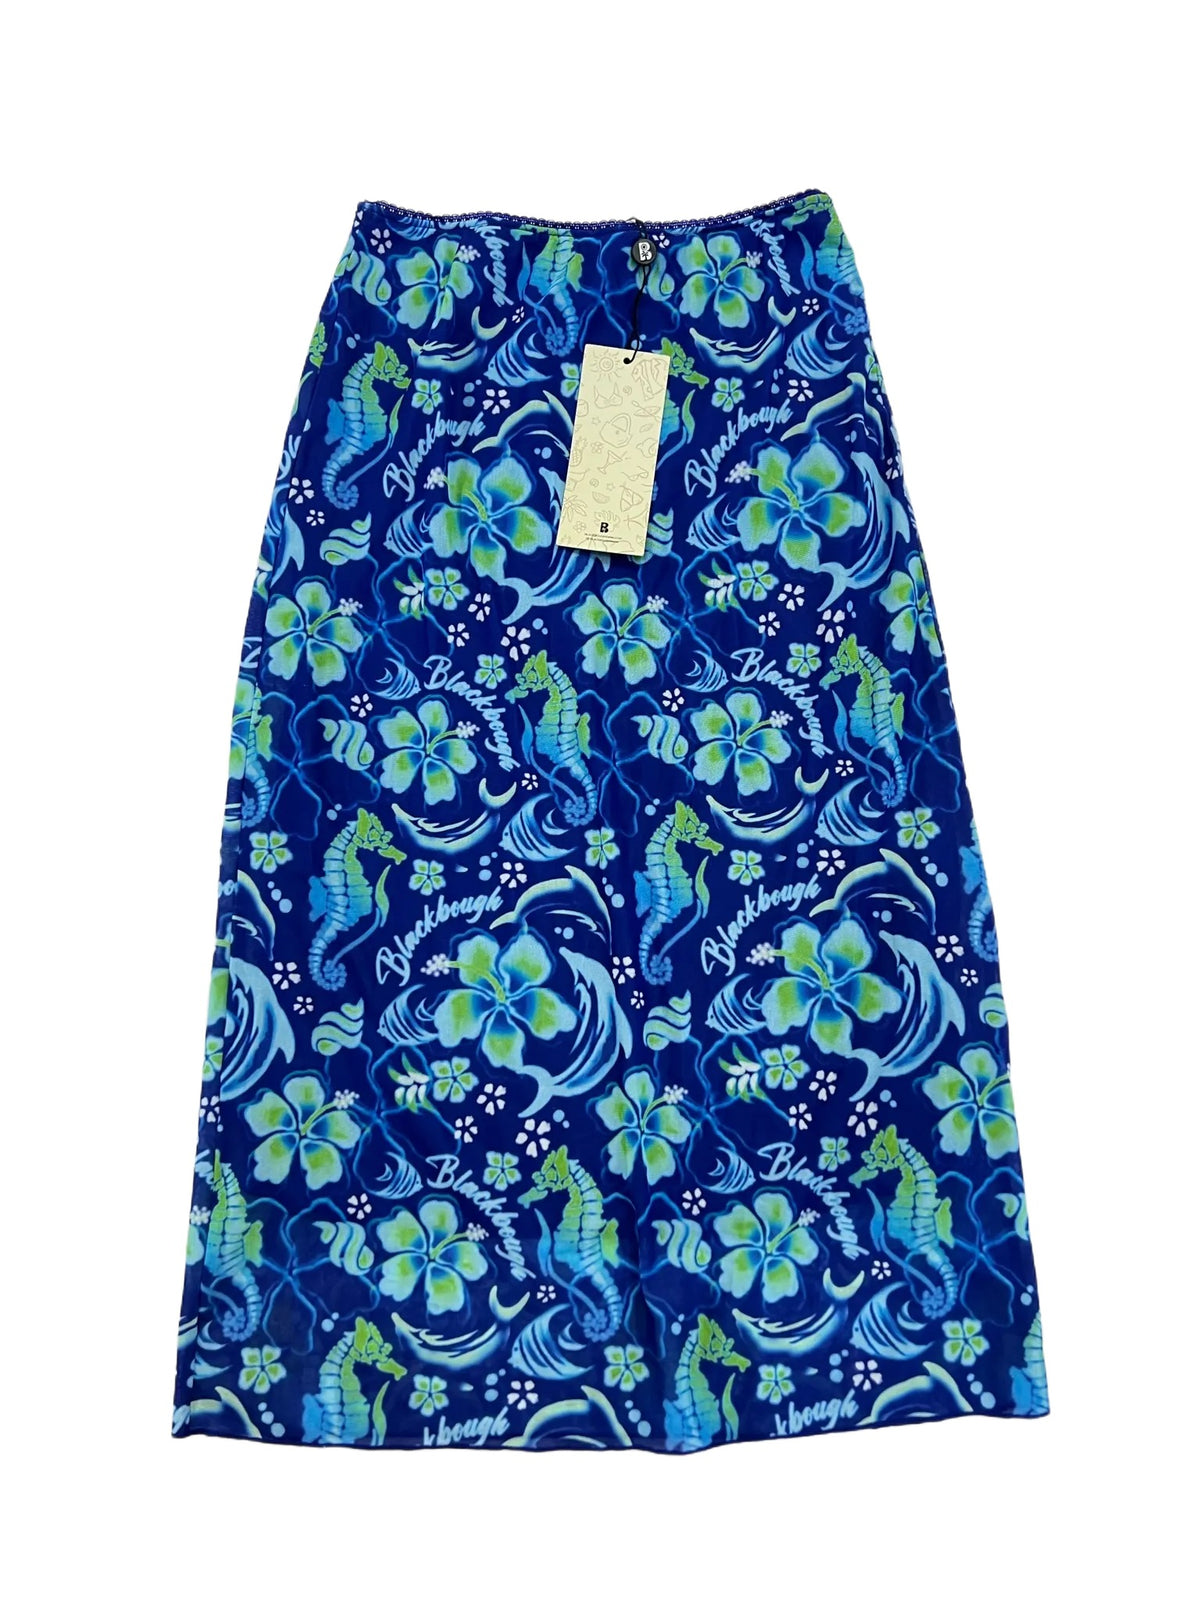 Blackbough- Blue Floral Midi Skirt New With Tags!